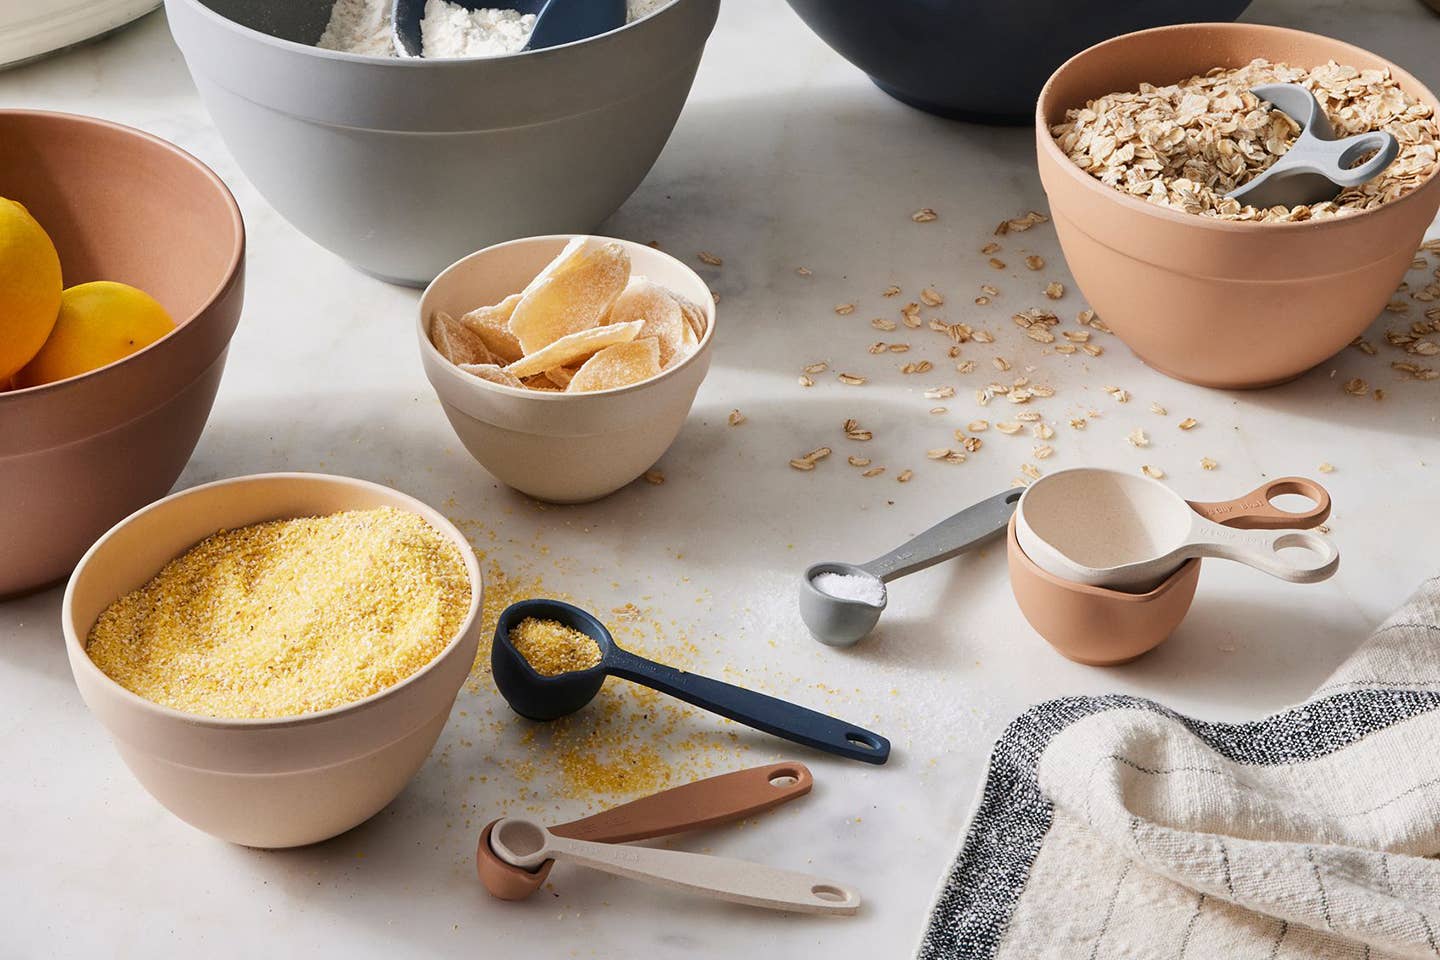 Recipe Testers Reveal the Best Measuring Spoons That Deliver True